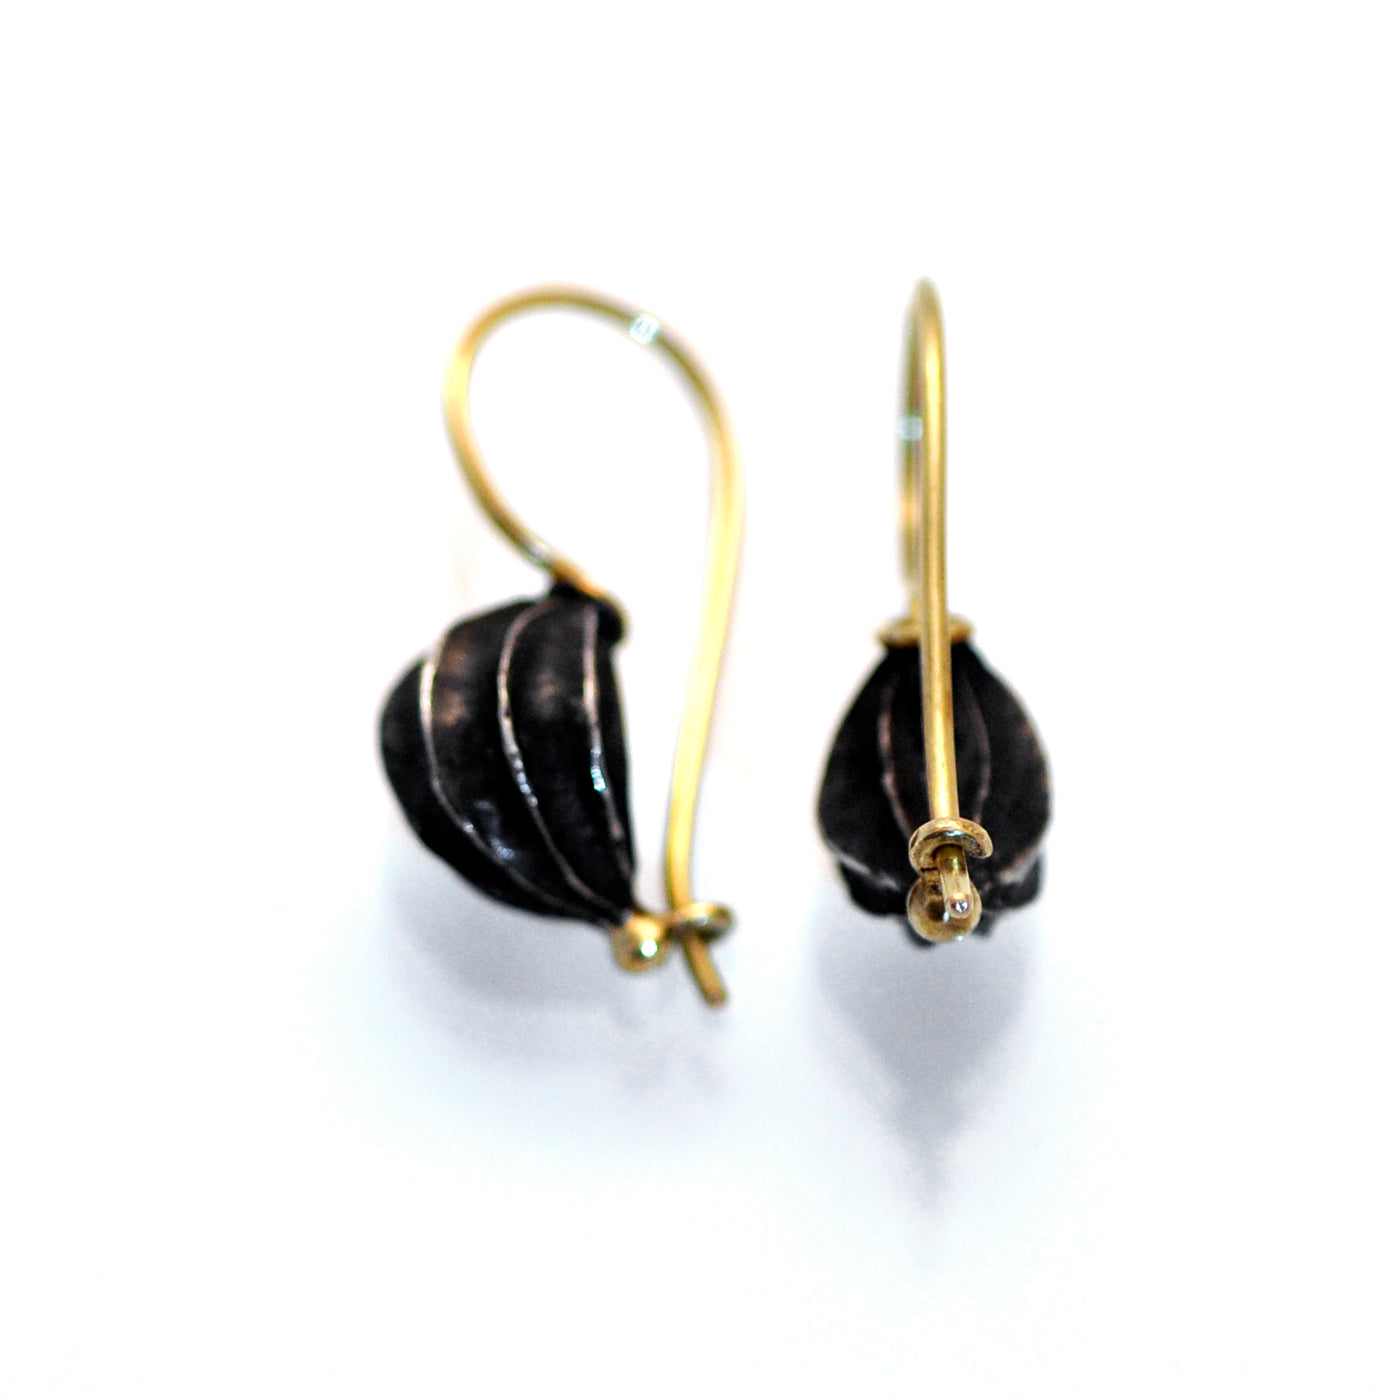 Fat seed pod earrings, oxidised silver with 18ct Gold wire